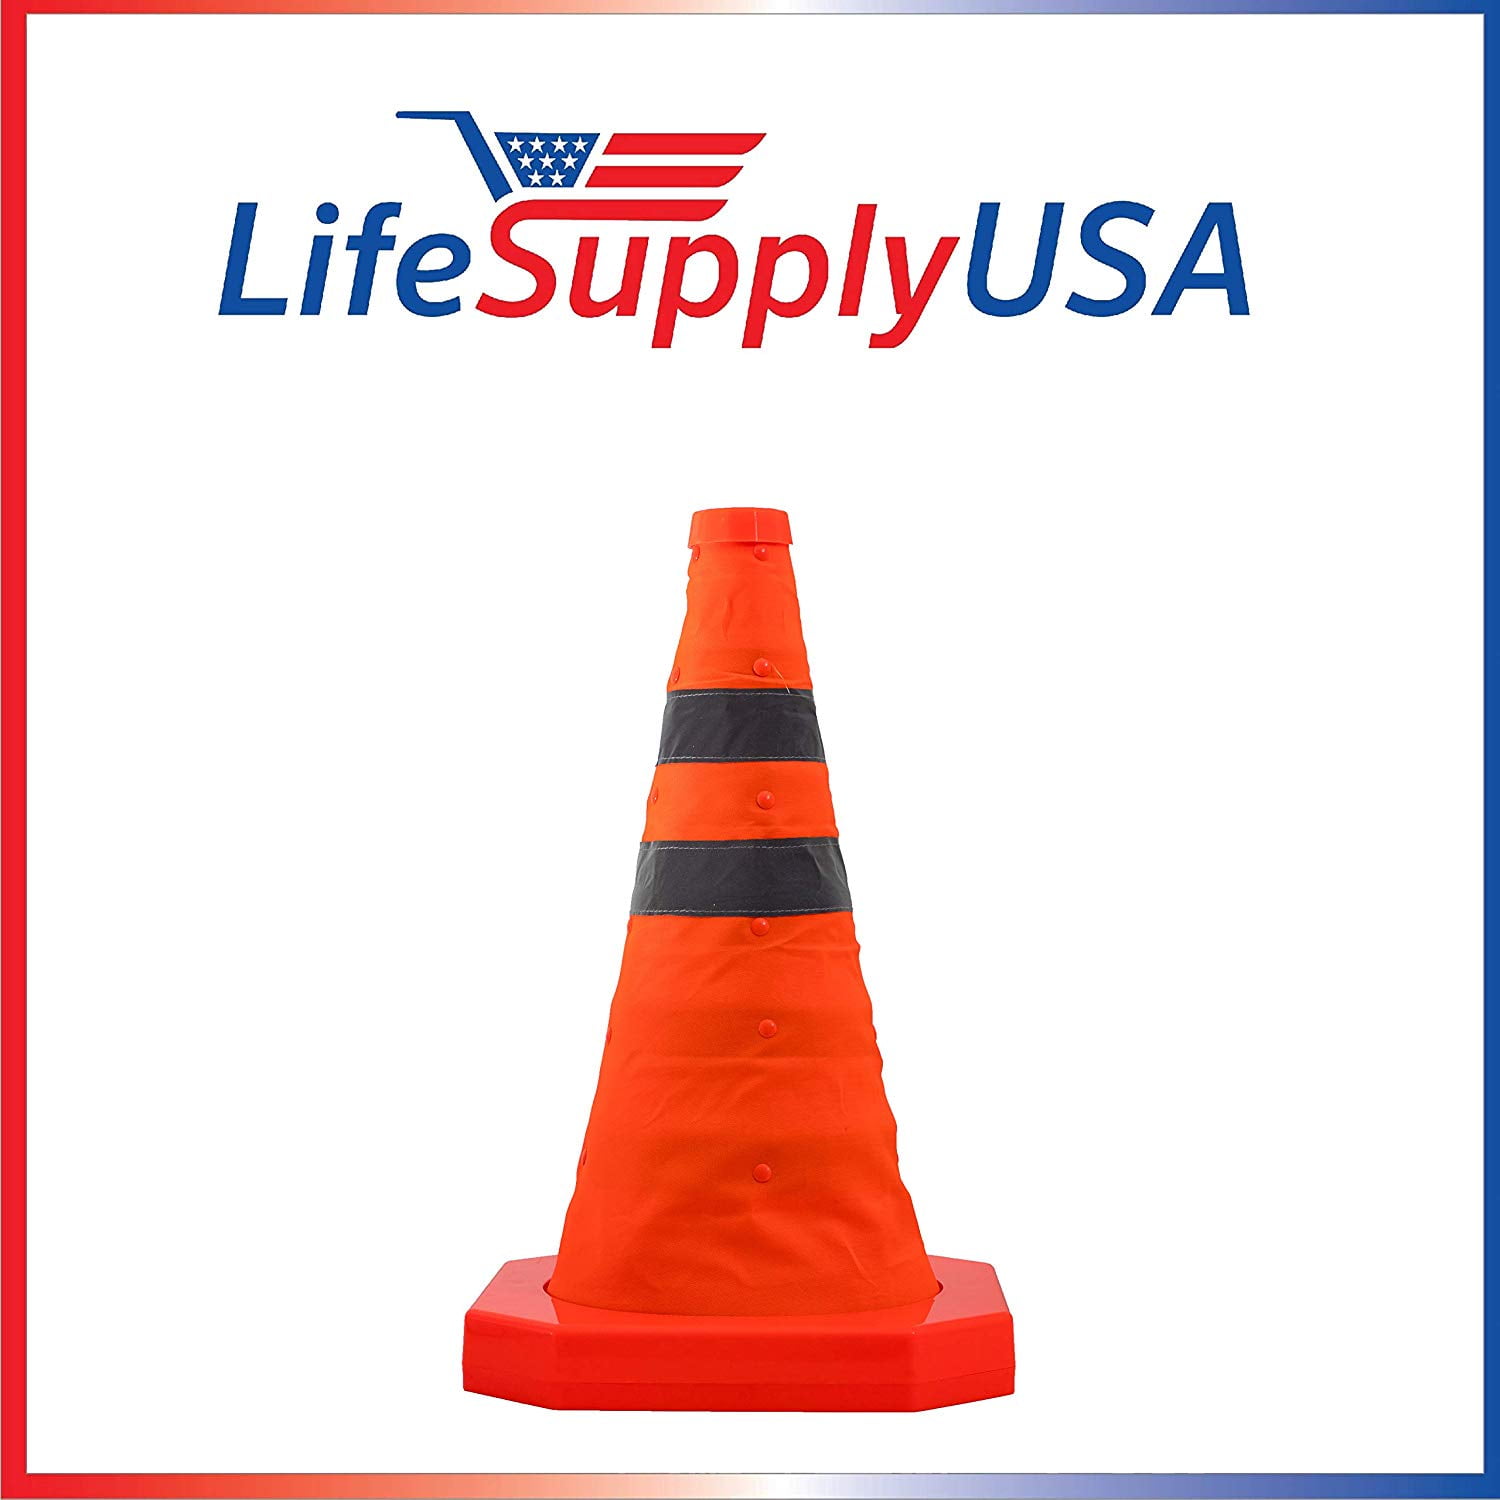 1 1PCS LED Reflective USB Rechargeable Traffic Cones Light Up Emergency Collapsible Safety Cone 16 Inch Pop Up Road No Parking Cones for Drivers Car Training Driving Practice Construction Work Sports